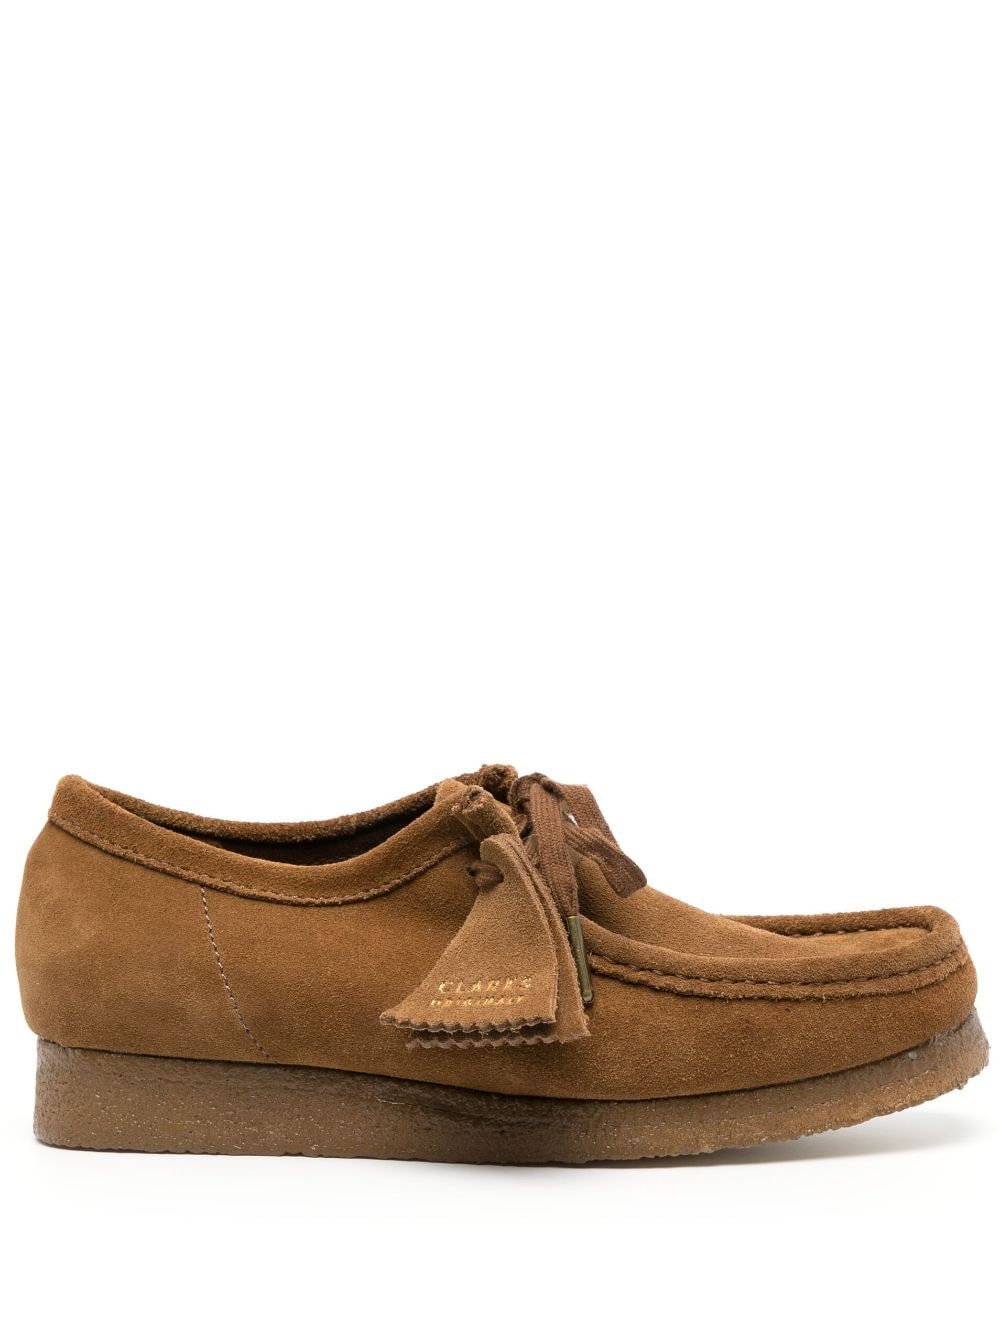 Clarks Brown Wallabee Cola Suede Loafers | ModeSens